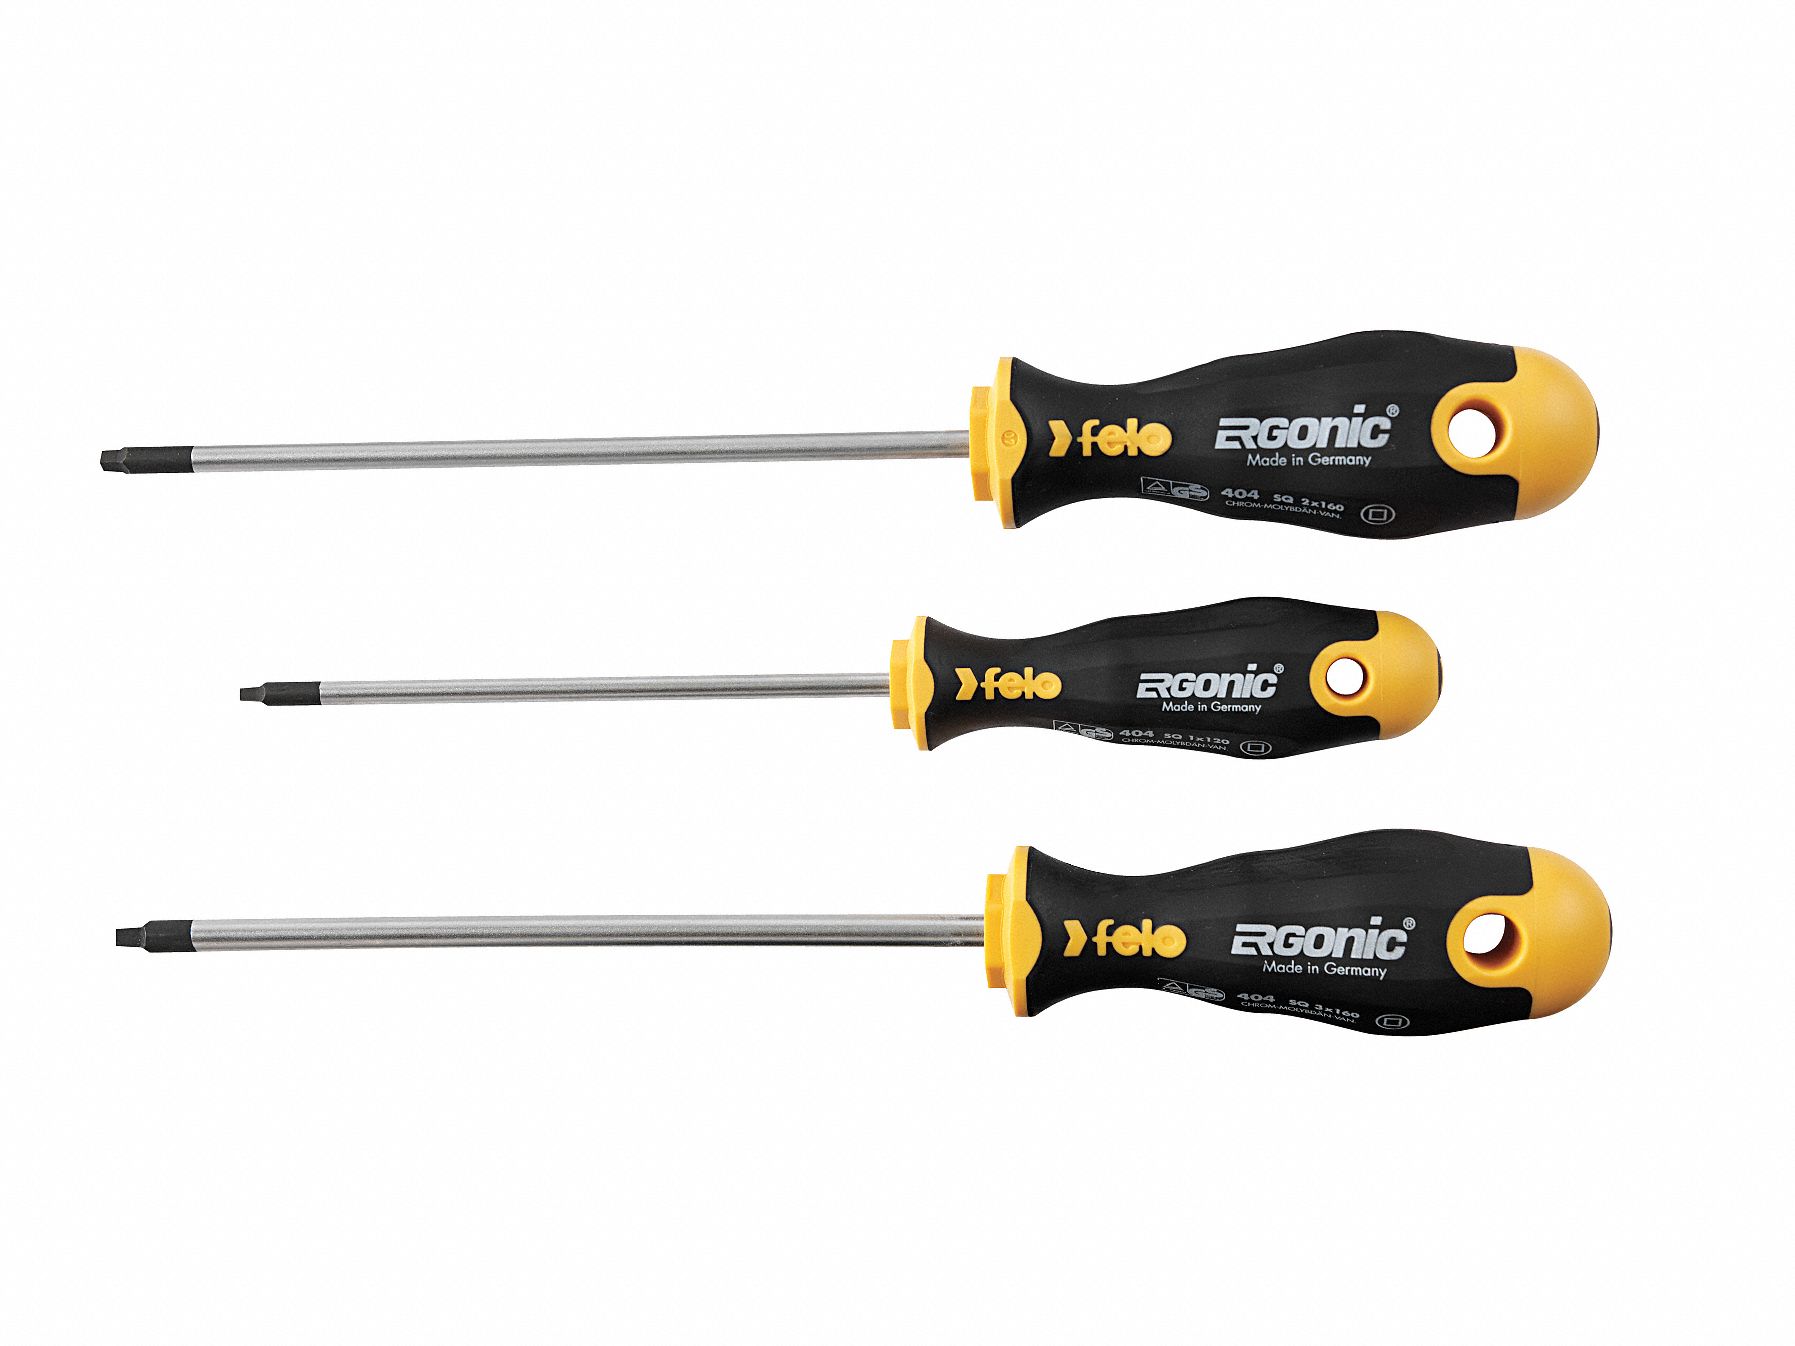 Square Recess Screwdriver Set Multicomponent, Number of Pieces: 3